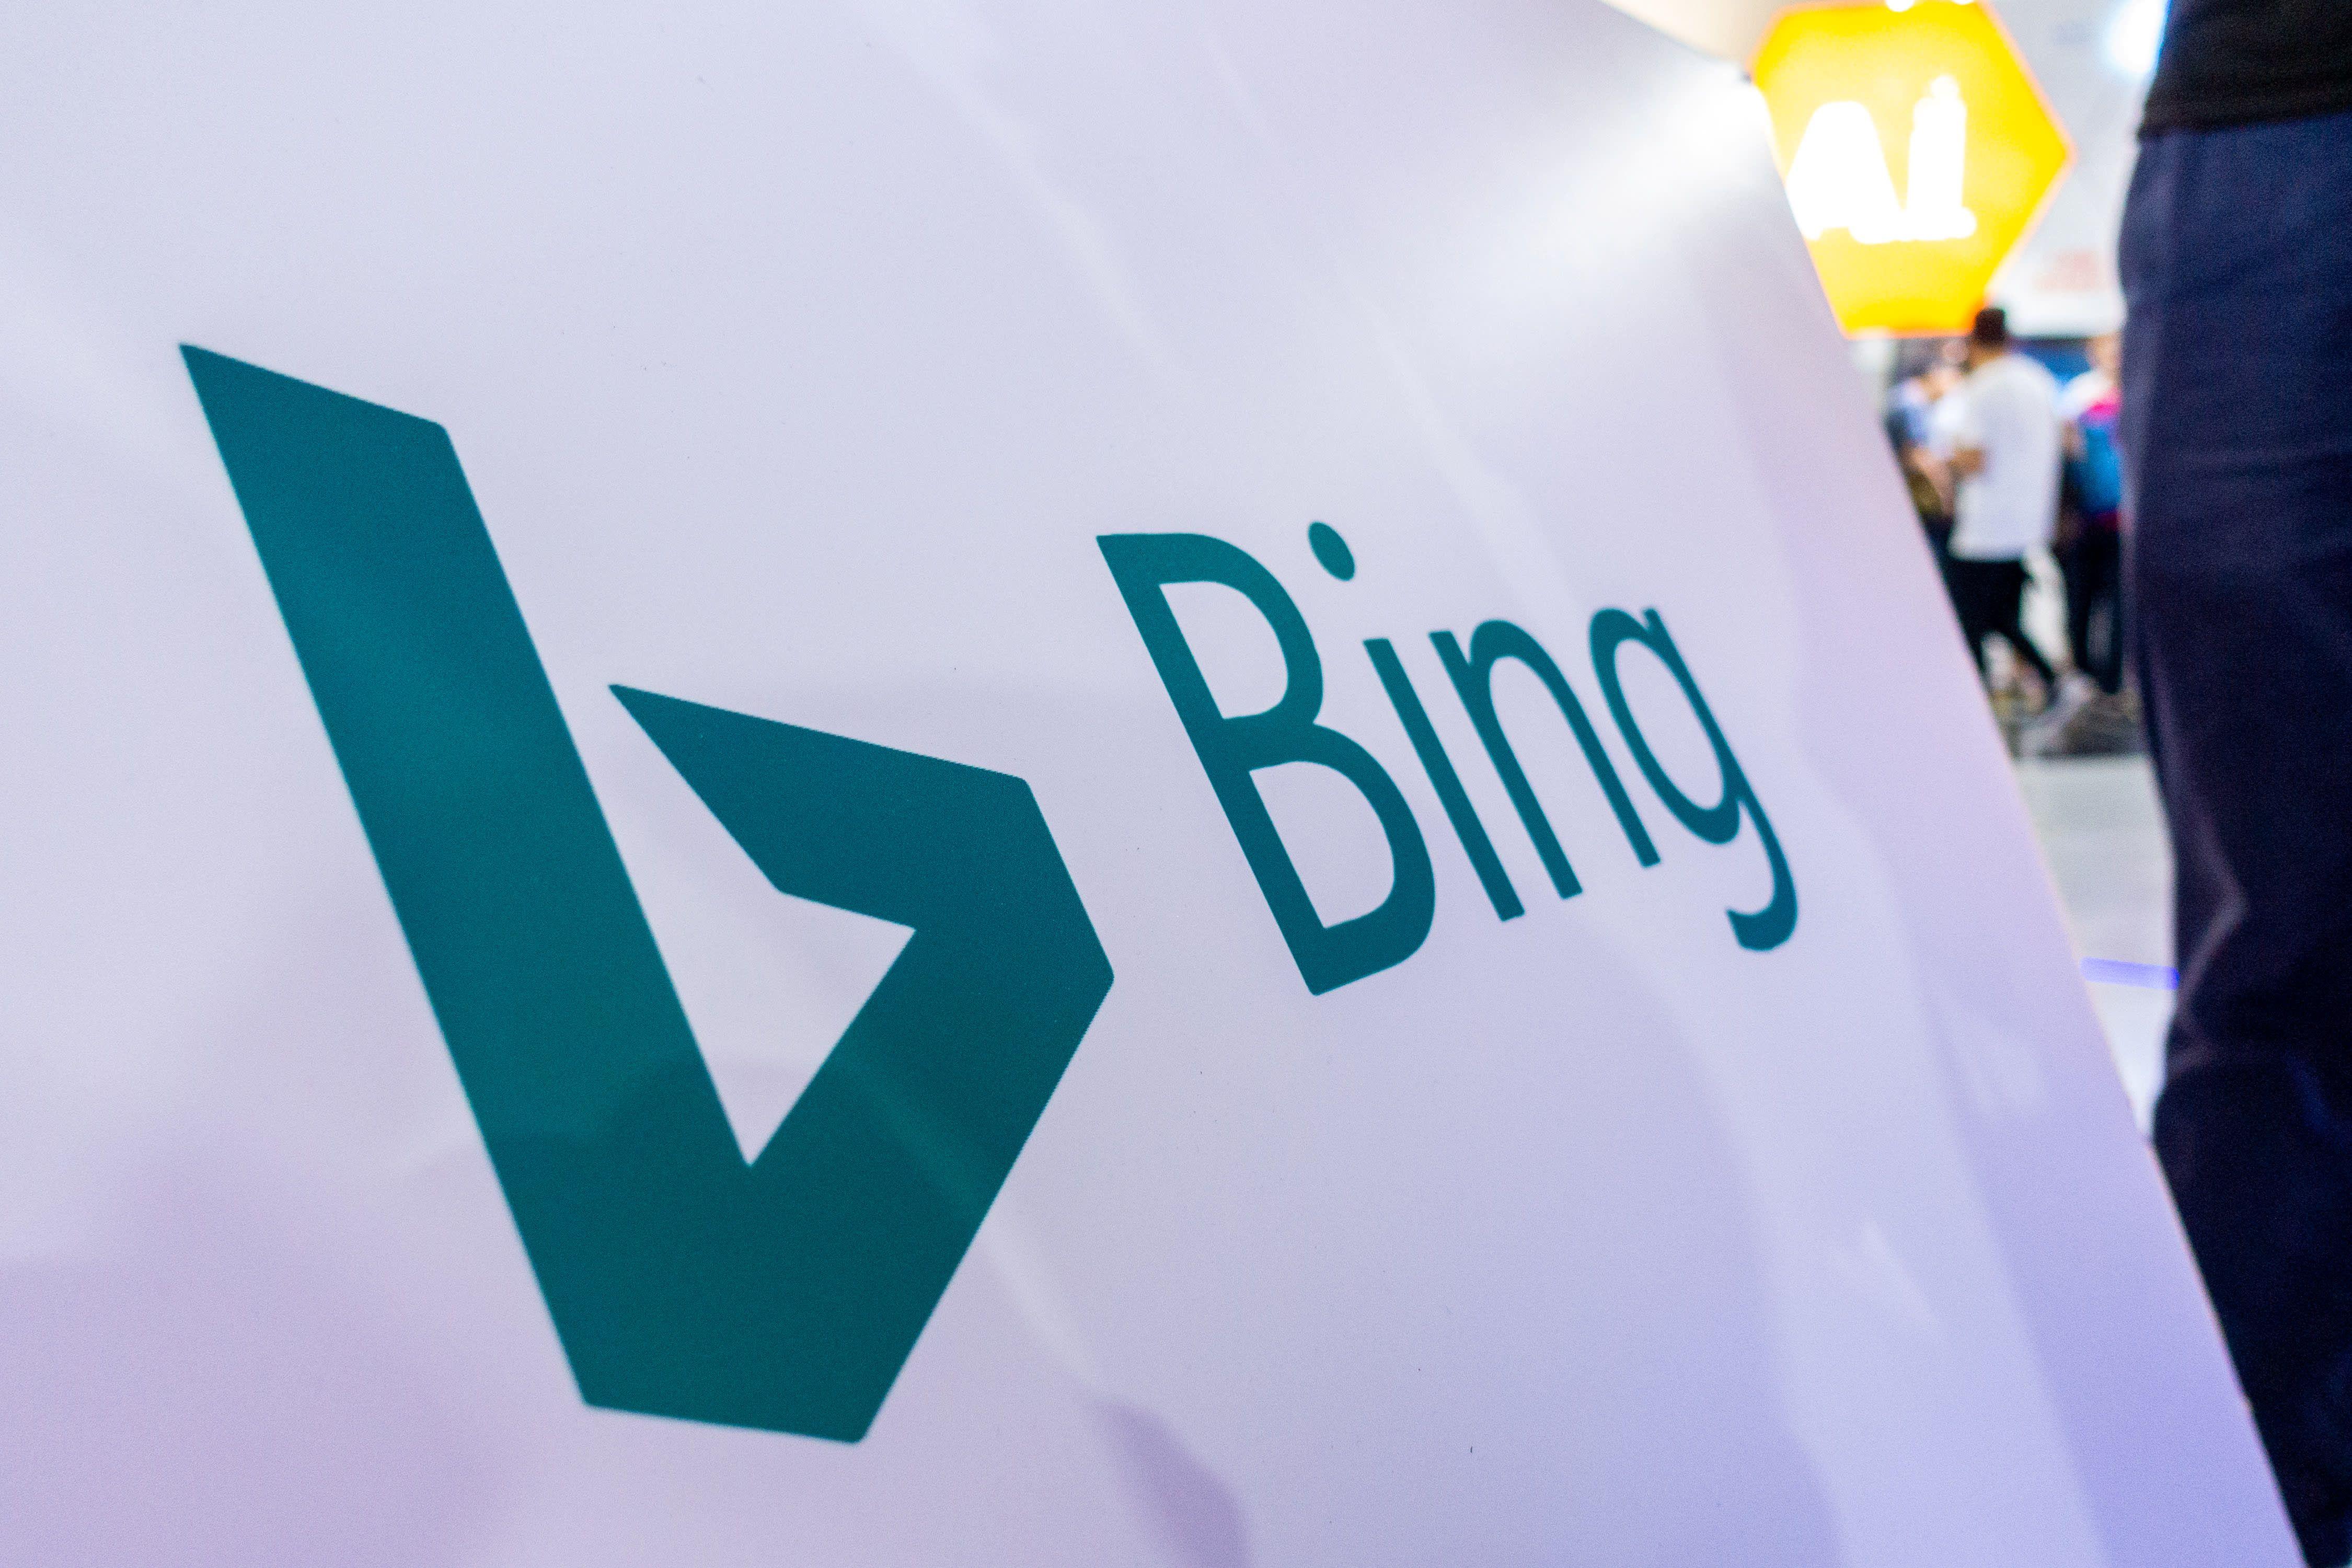 Bing Search Engine Logo - Microsoft says Bing search engine blocked in China Asian Review